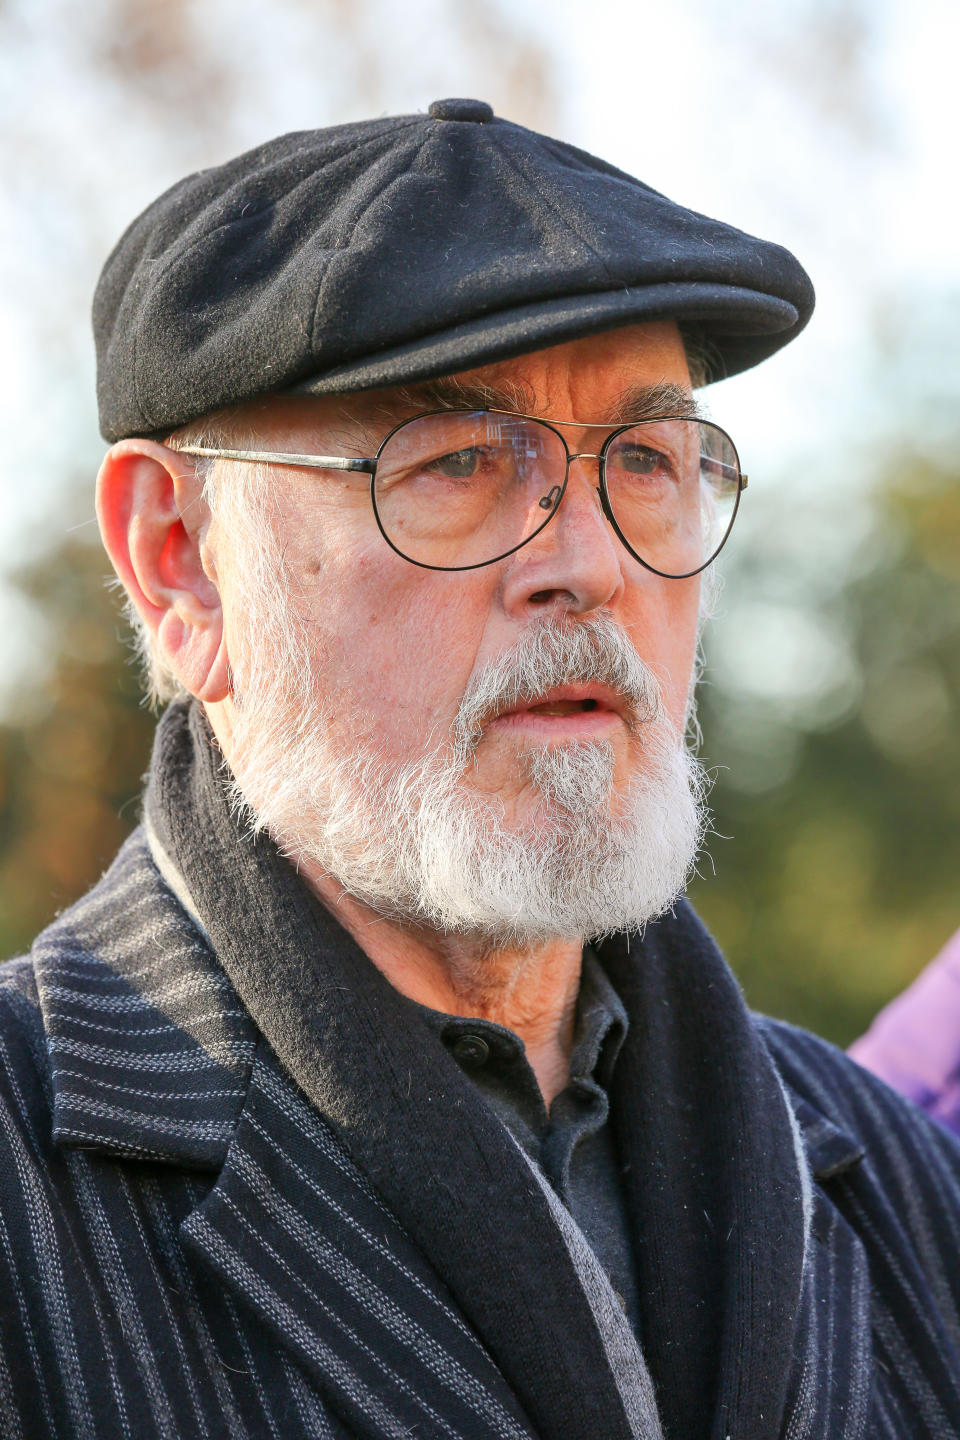 Downton Abbey actor, Peter Egan attends the unveiling of 21 bronze life-sized elephants sculptured by artists, Gillie and Marc at Marble Arch in London. The sculptures are to hight the plight of the species which faces extinction by 2040. The herd of elephants will be on display for one year, until 4 December 2020. (Photo by Steve Taylor / SOPA Images/Sipa USA)